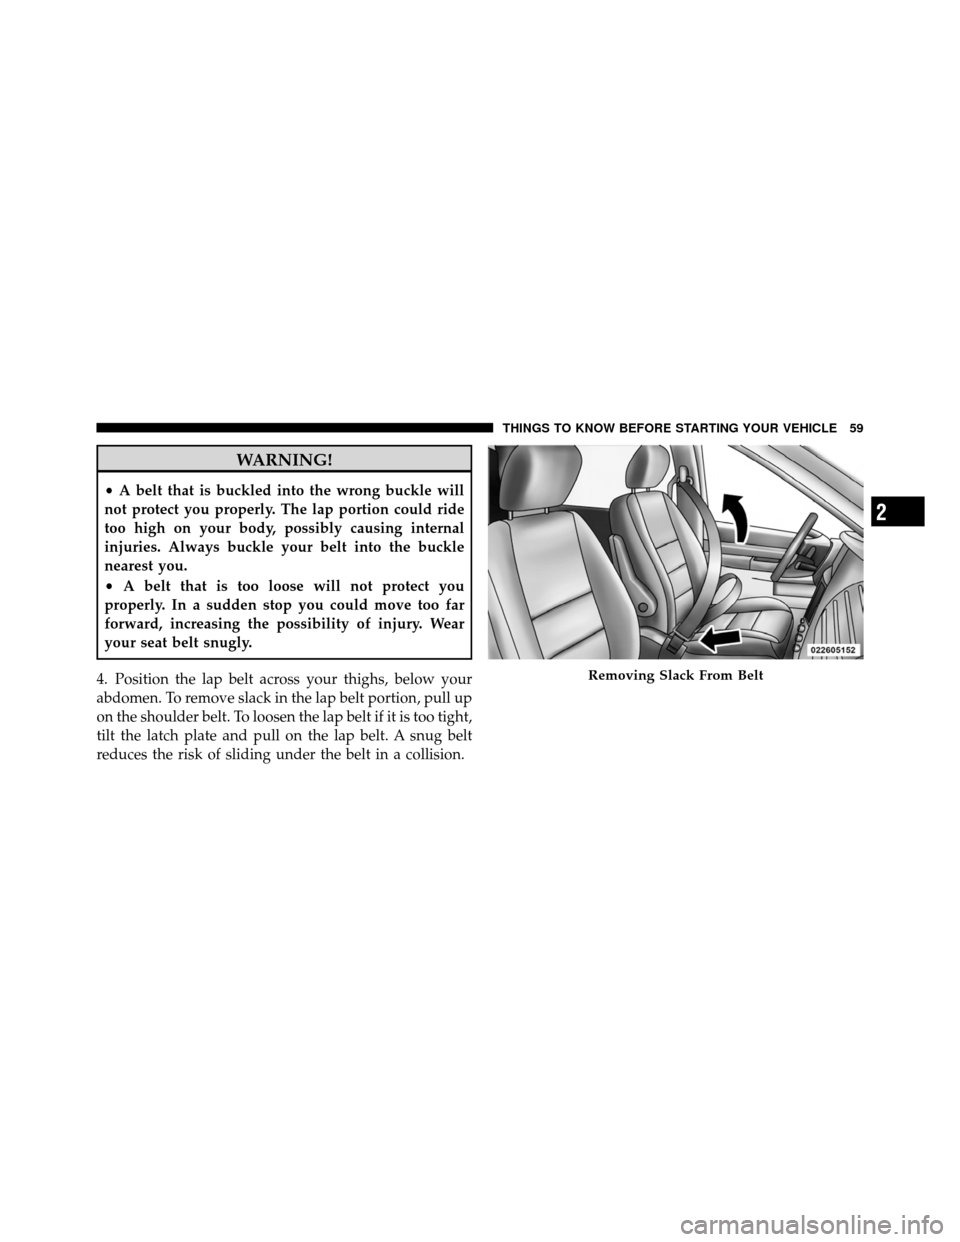 DODGE GRAND CARAVAN 2012 5.G Repair Manual WARNING!
•A belt that is buckled into the wrong buckle will
not protect you properly. The lap portion could ride
too high on your body, possibly causing internal
injuries. Always buckle your belt in